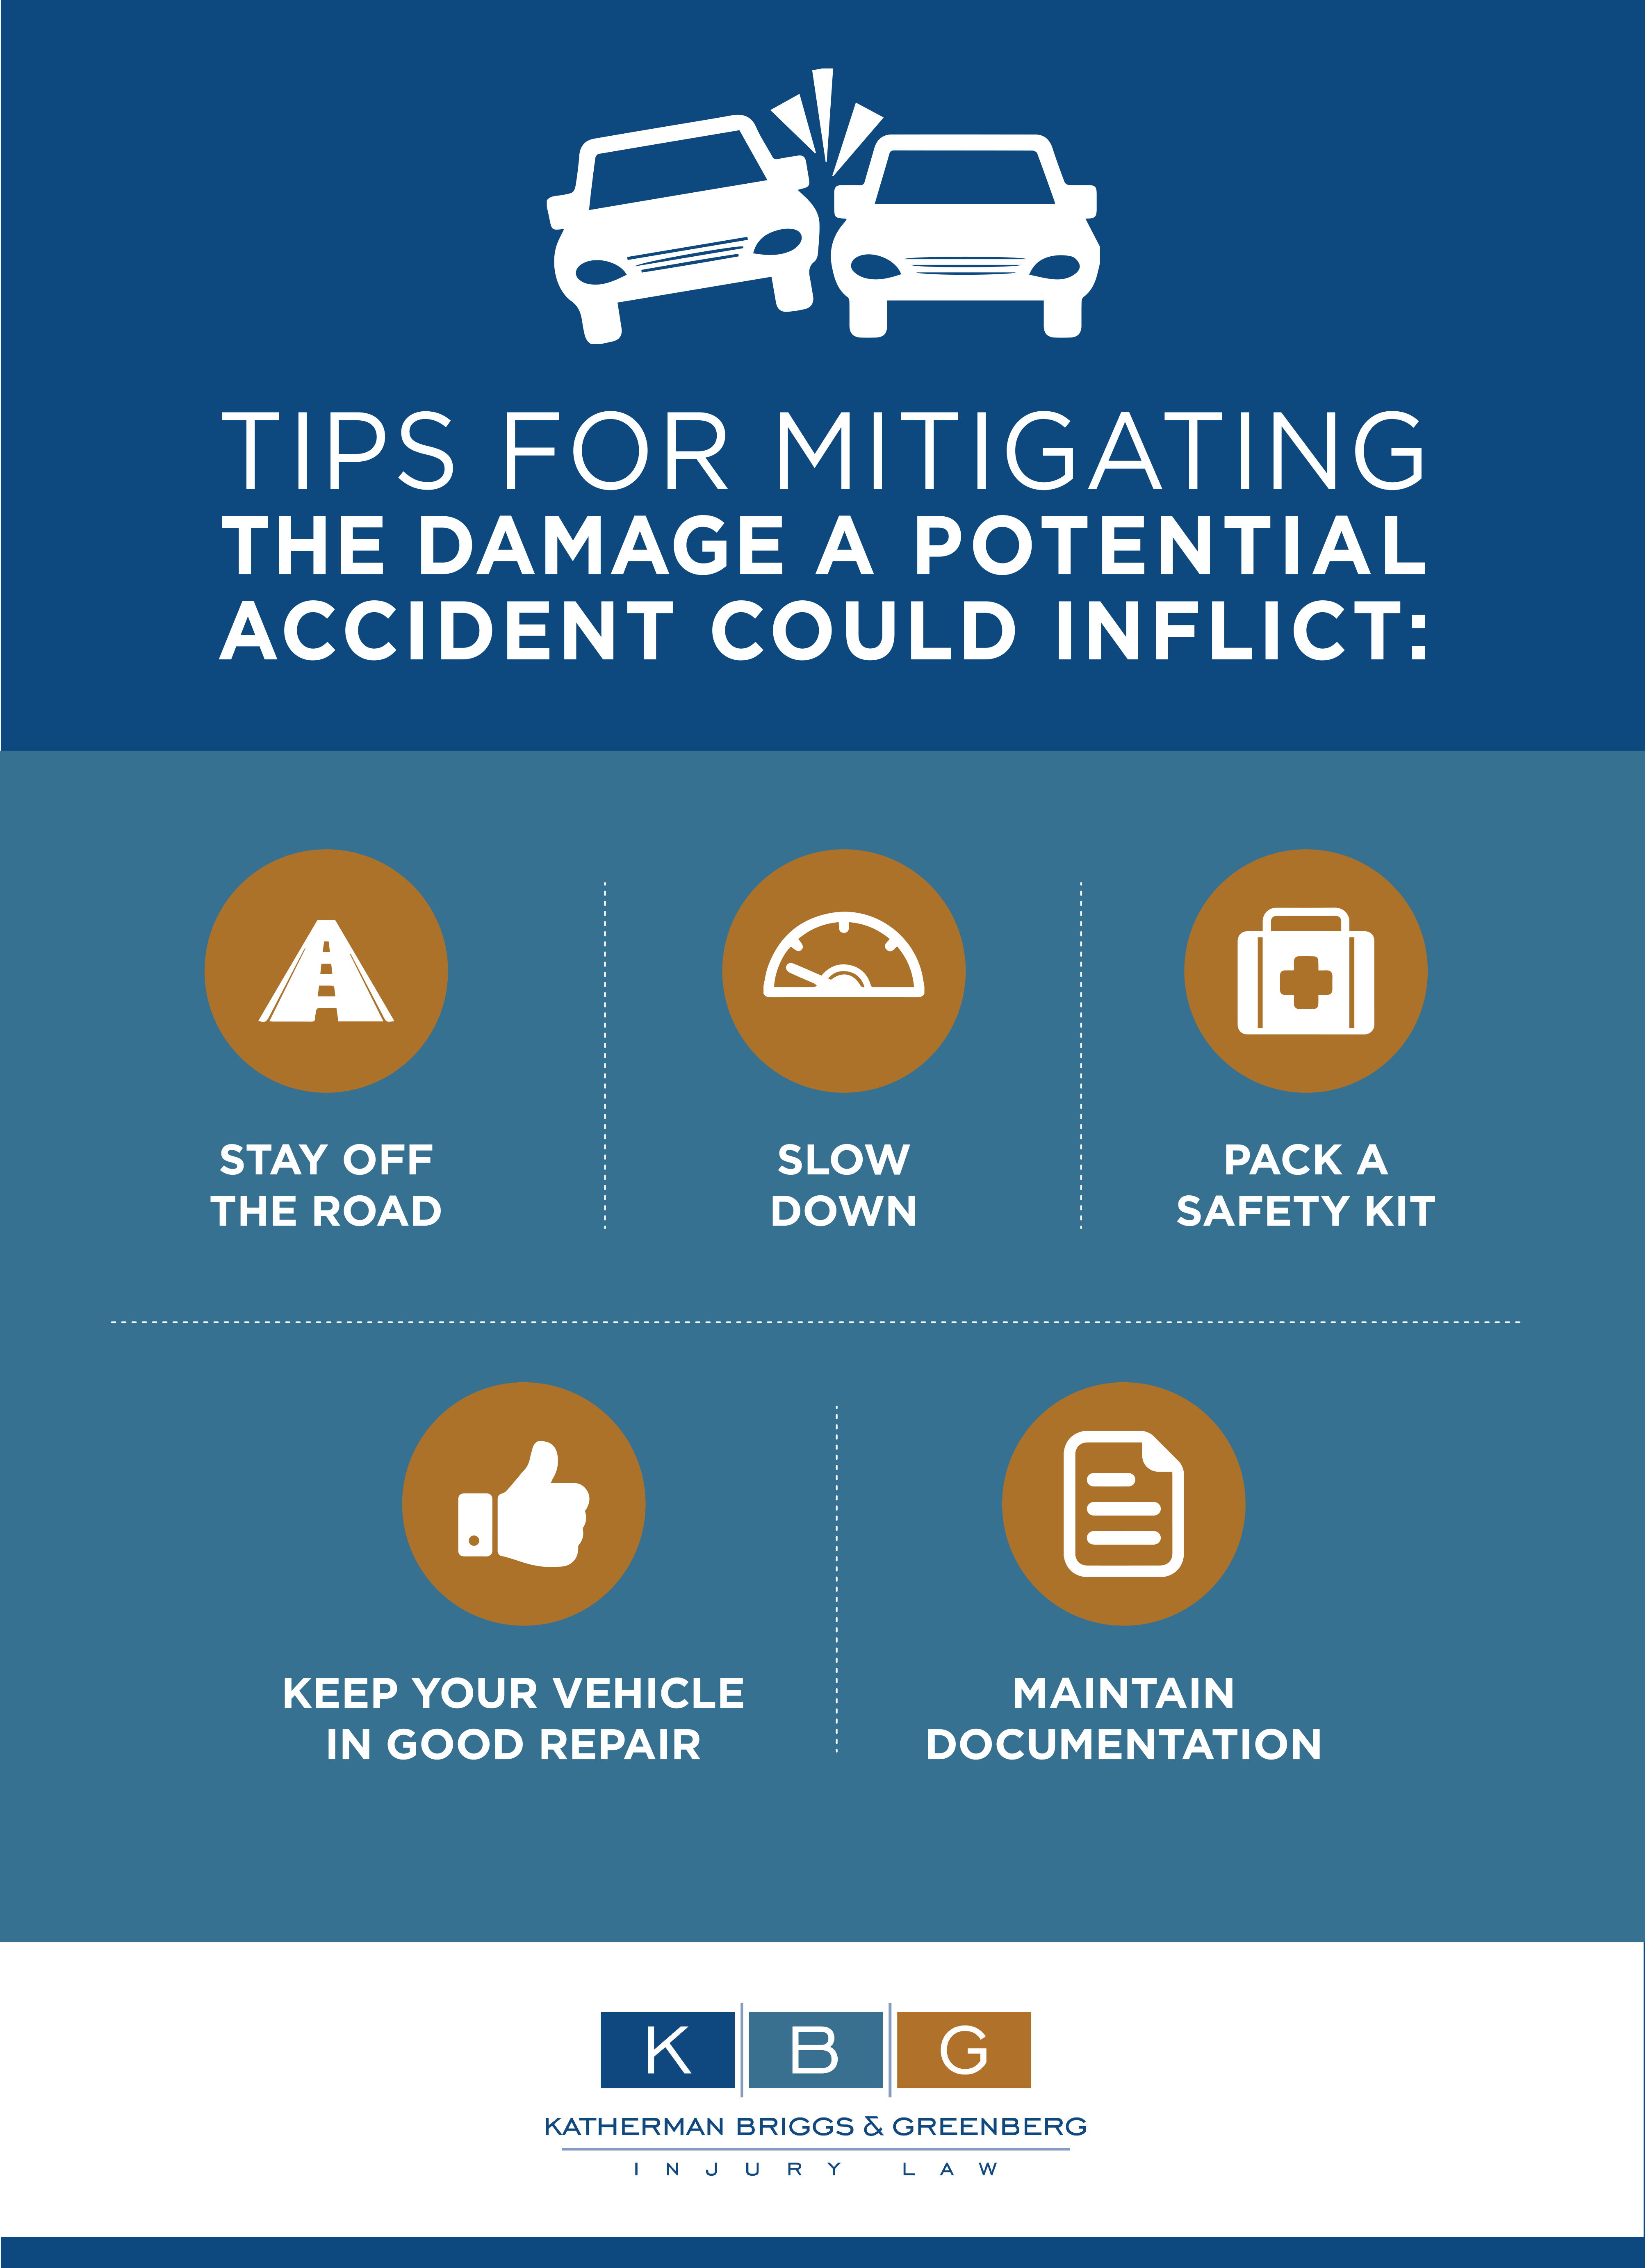 Tips for Avoiding Potential Damage in an Auto Accident [Infographic]